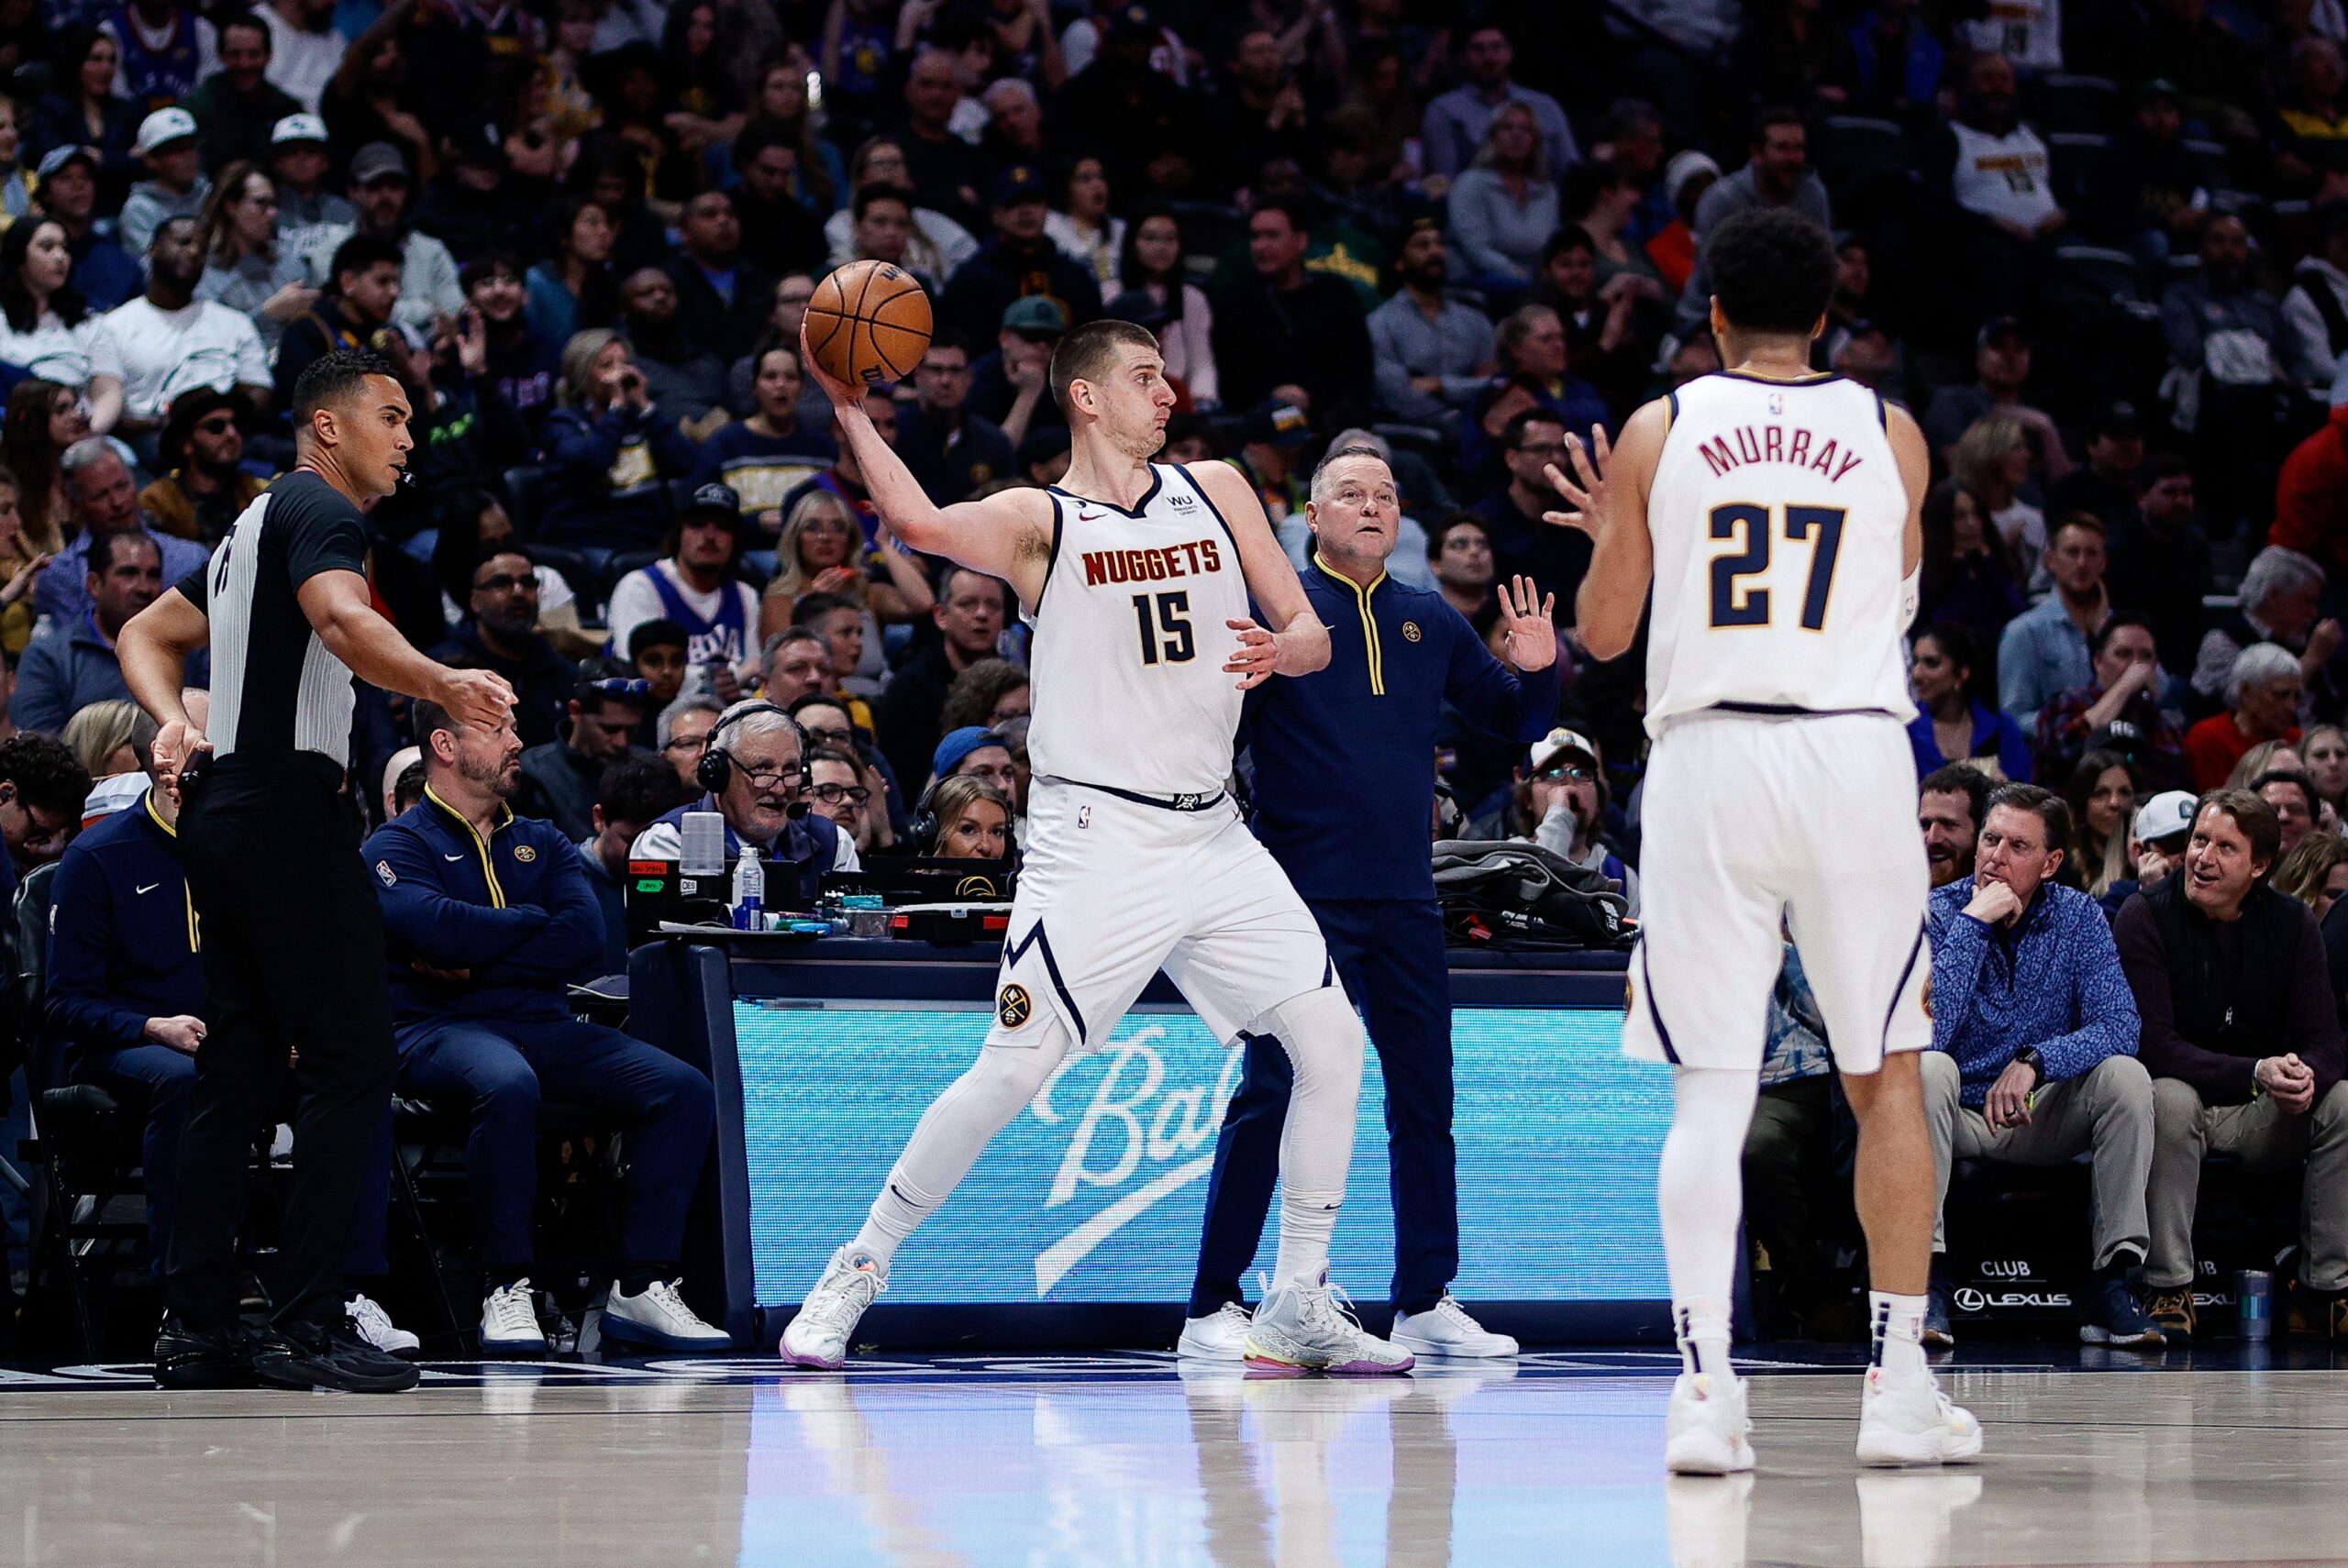 No MVP clash: Jokic feasts in Nuggets win as Embiid sits for Sixers